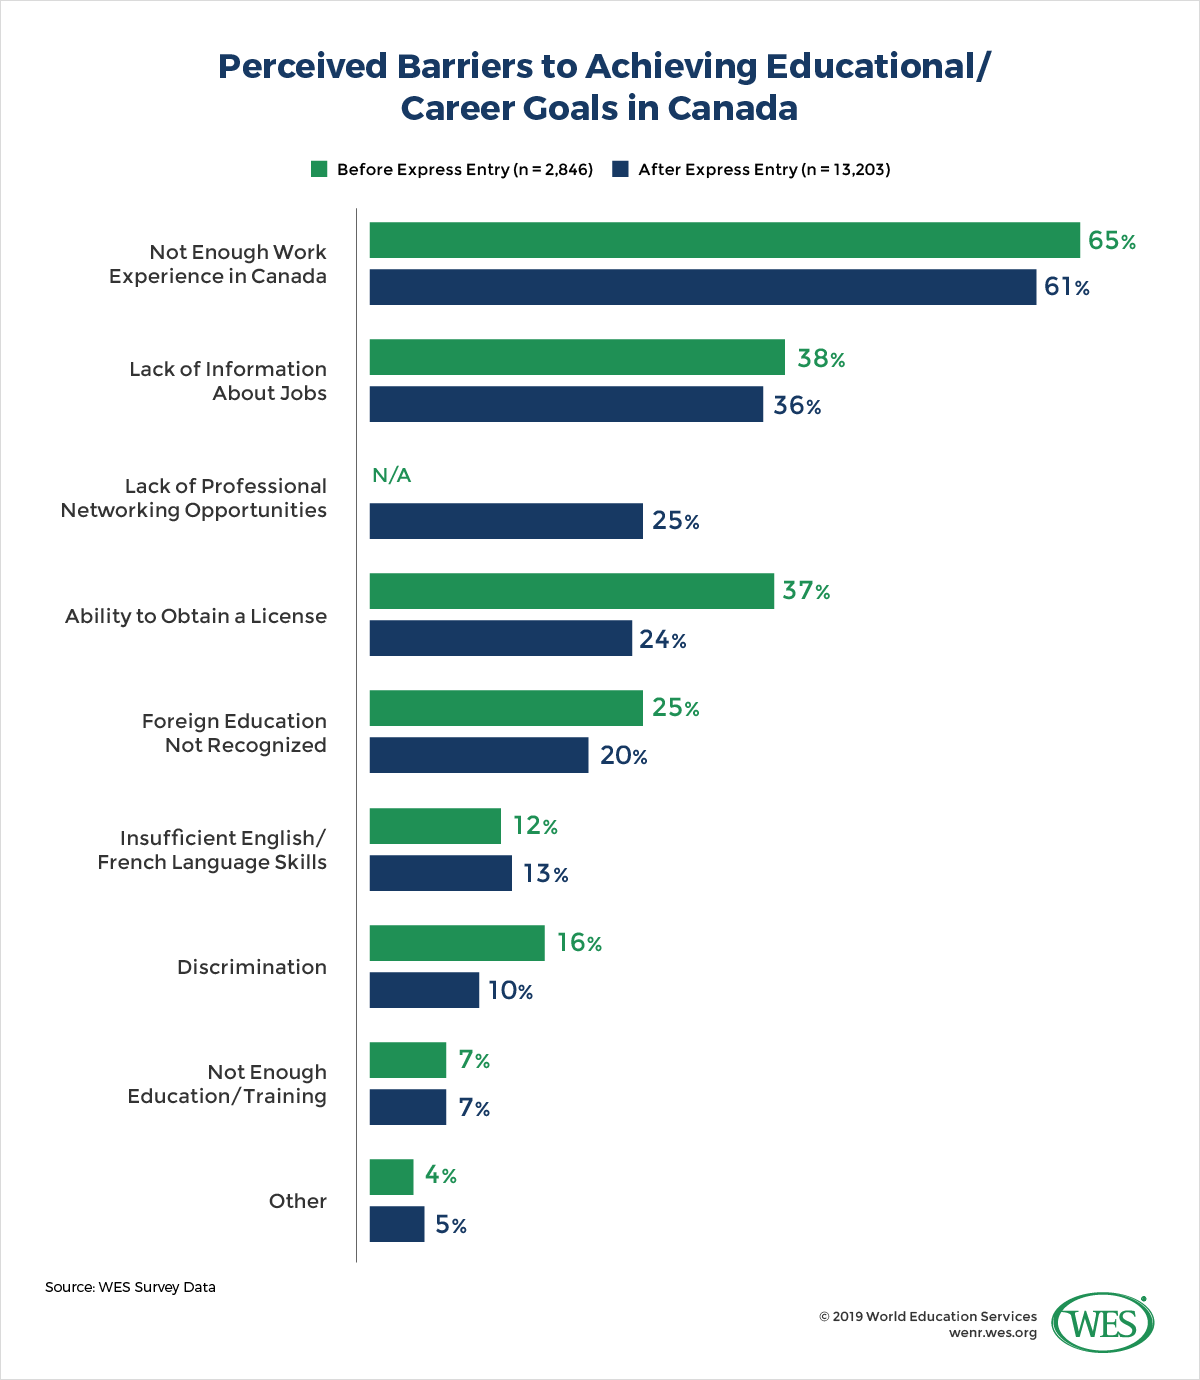 A chart showing the perceived barriers to achieving educational and career goals in Canada